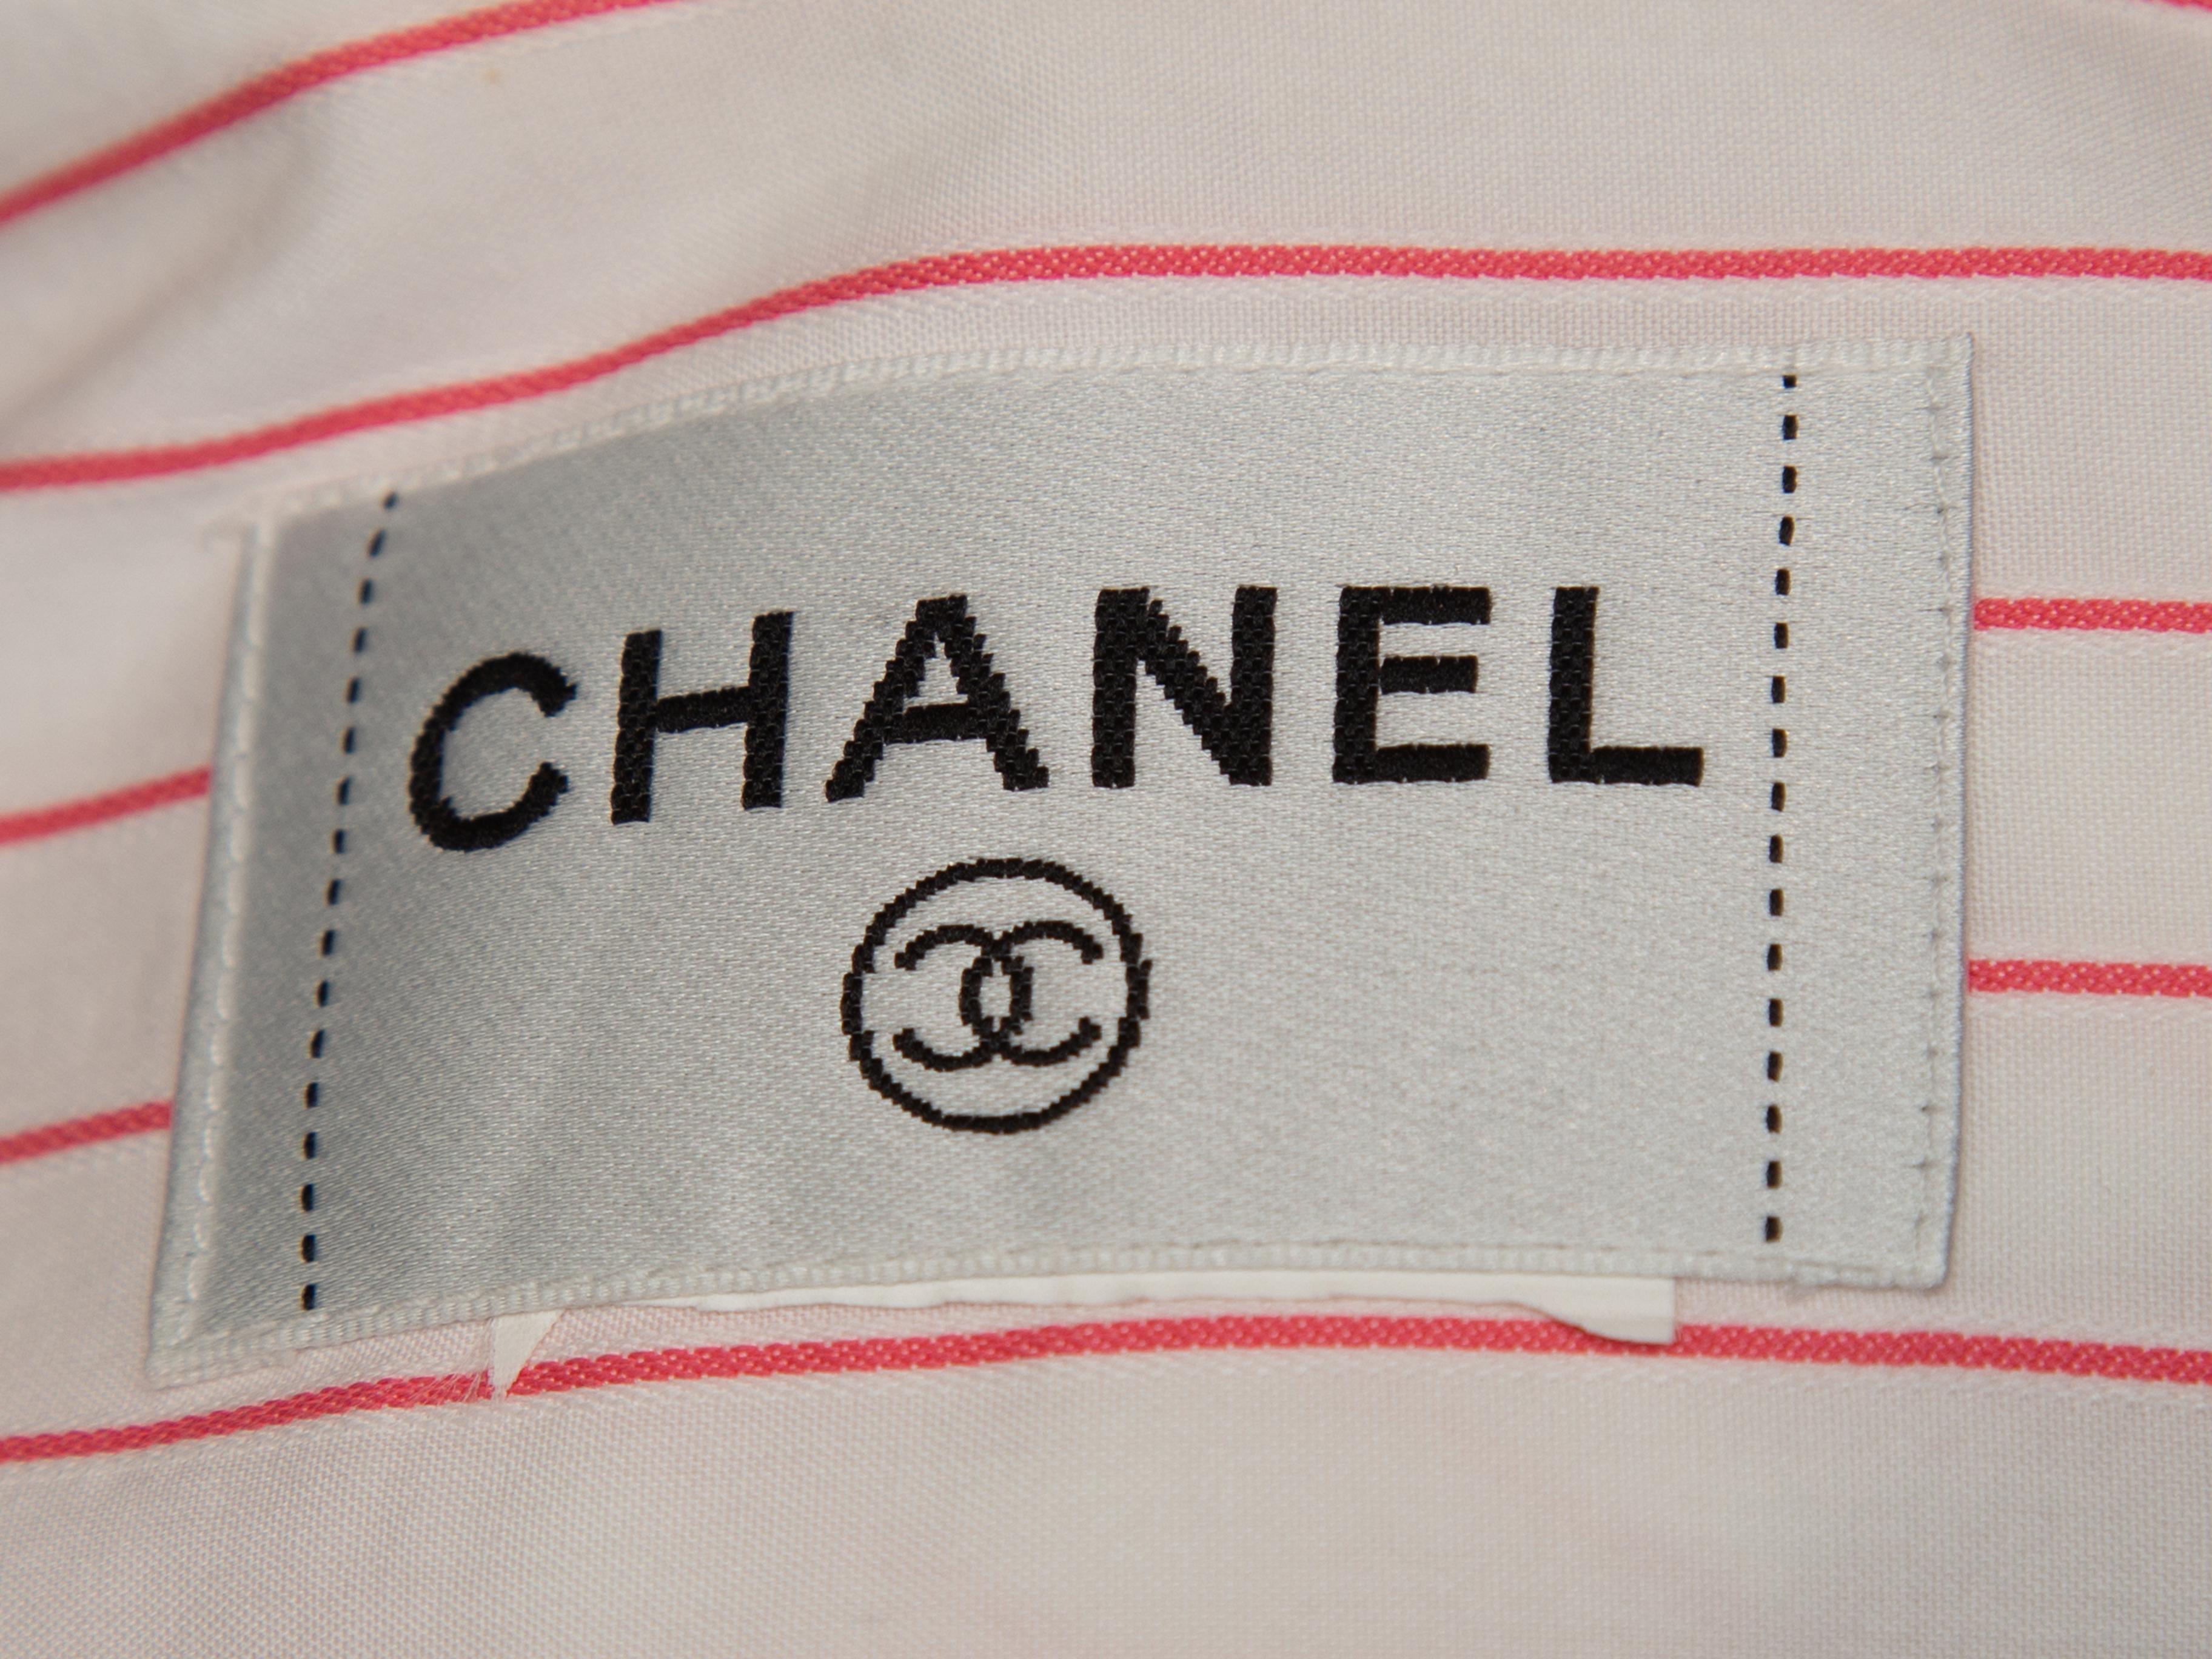 Product details: White and pink sleeveless striped button-up top by Chanel. Pointed collar. CC button closures at center front. Designer size 42. 40